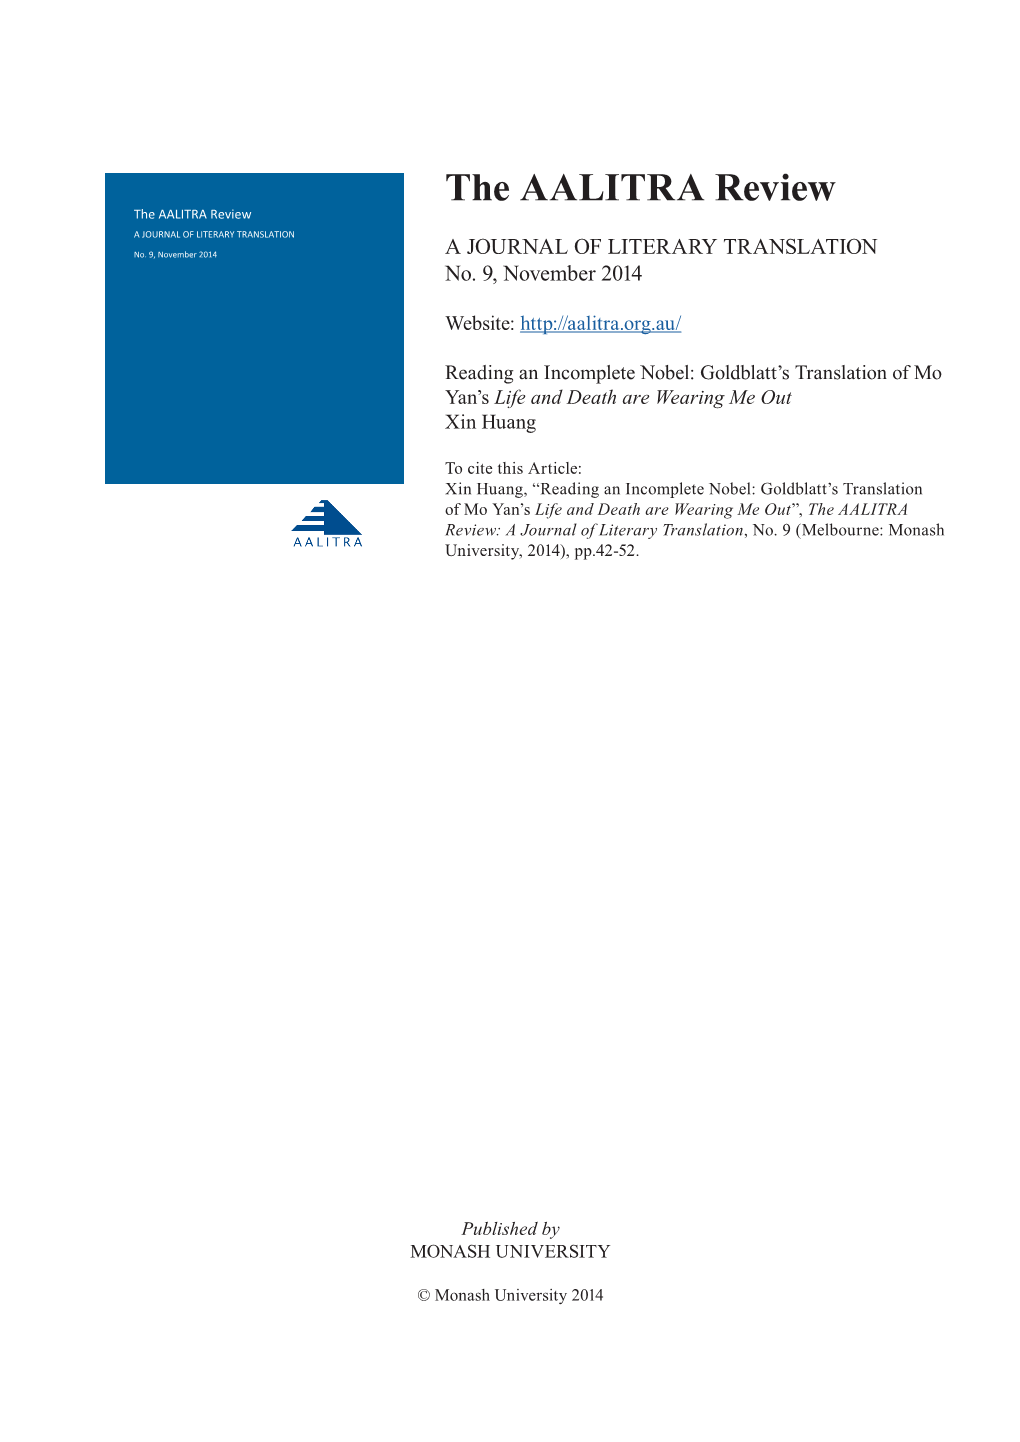 The AALITRA Review the AALITRA Review a JOURNAL of LITERARY TRANSLATION